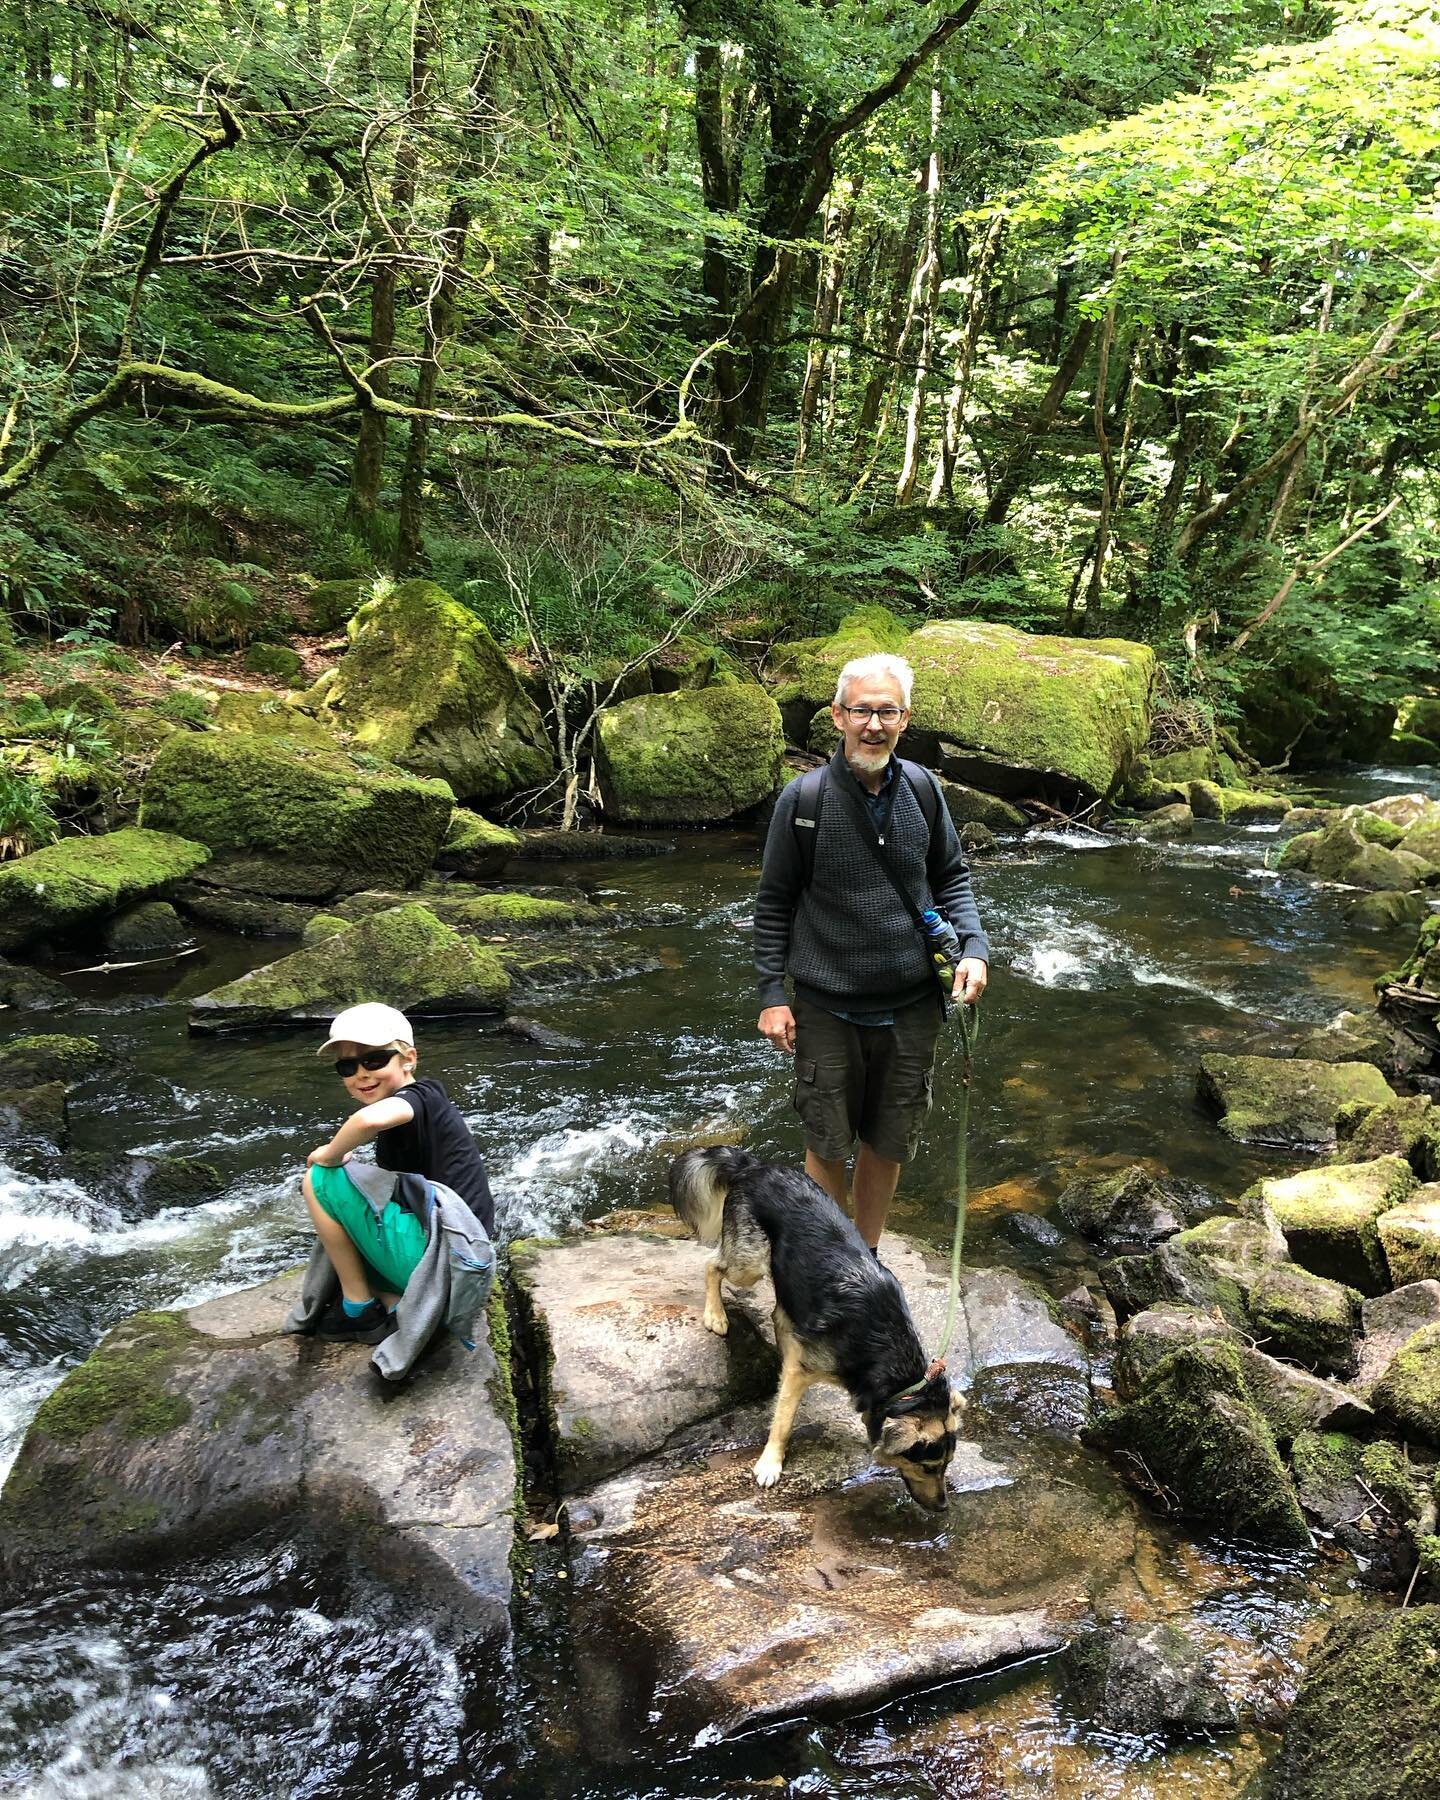 &ldquo;What&rsquo;s around the bend in the river?&hellip;.&rdquo; 

We&rsquo;re staying very close to Golitha Falls on the River Fowey. We hiked the edge of the cascading waterway, through beautiful ancient, oak woodland, over moss covered boulders a